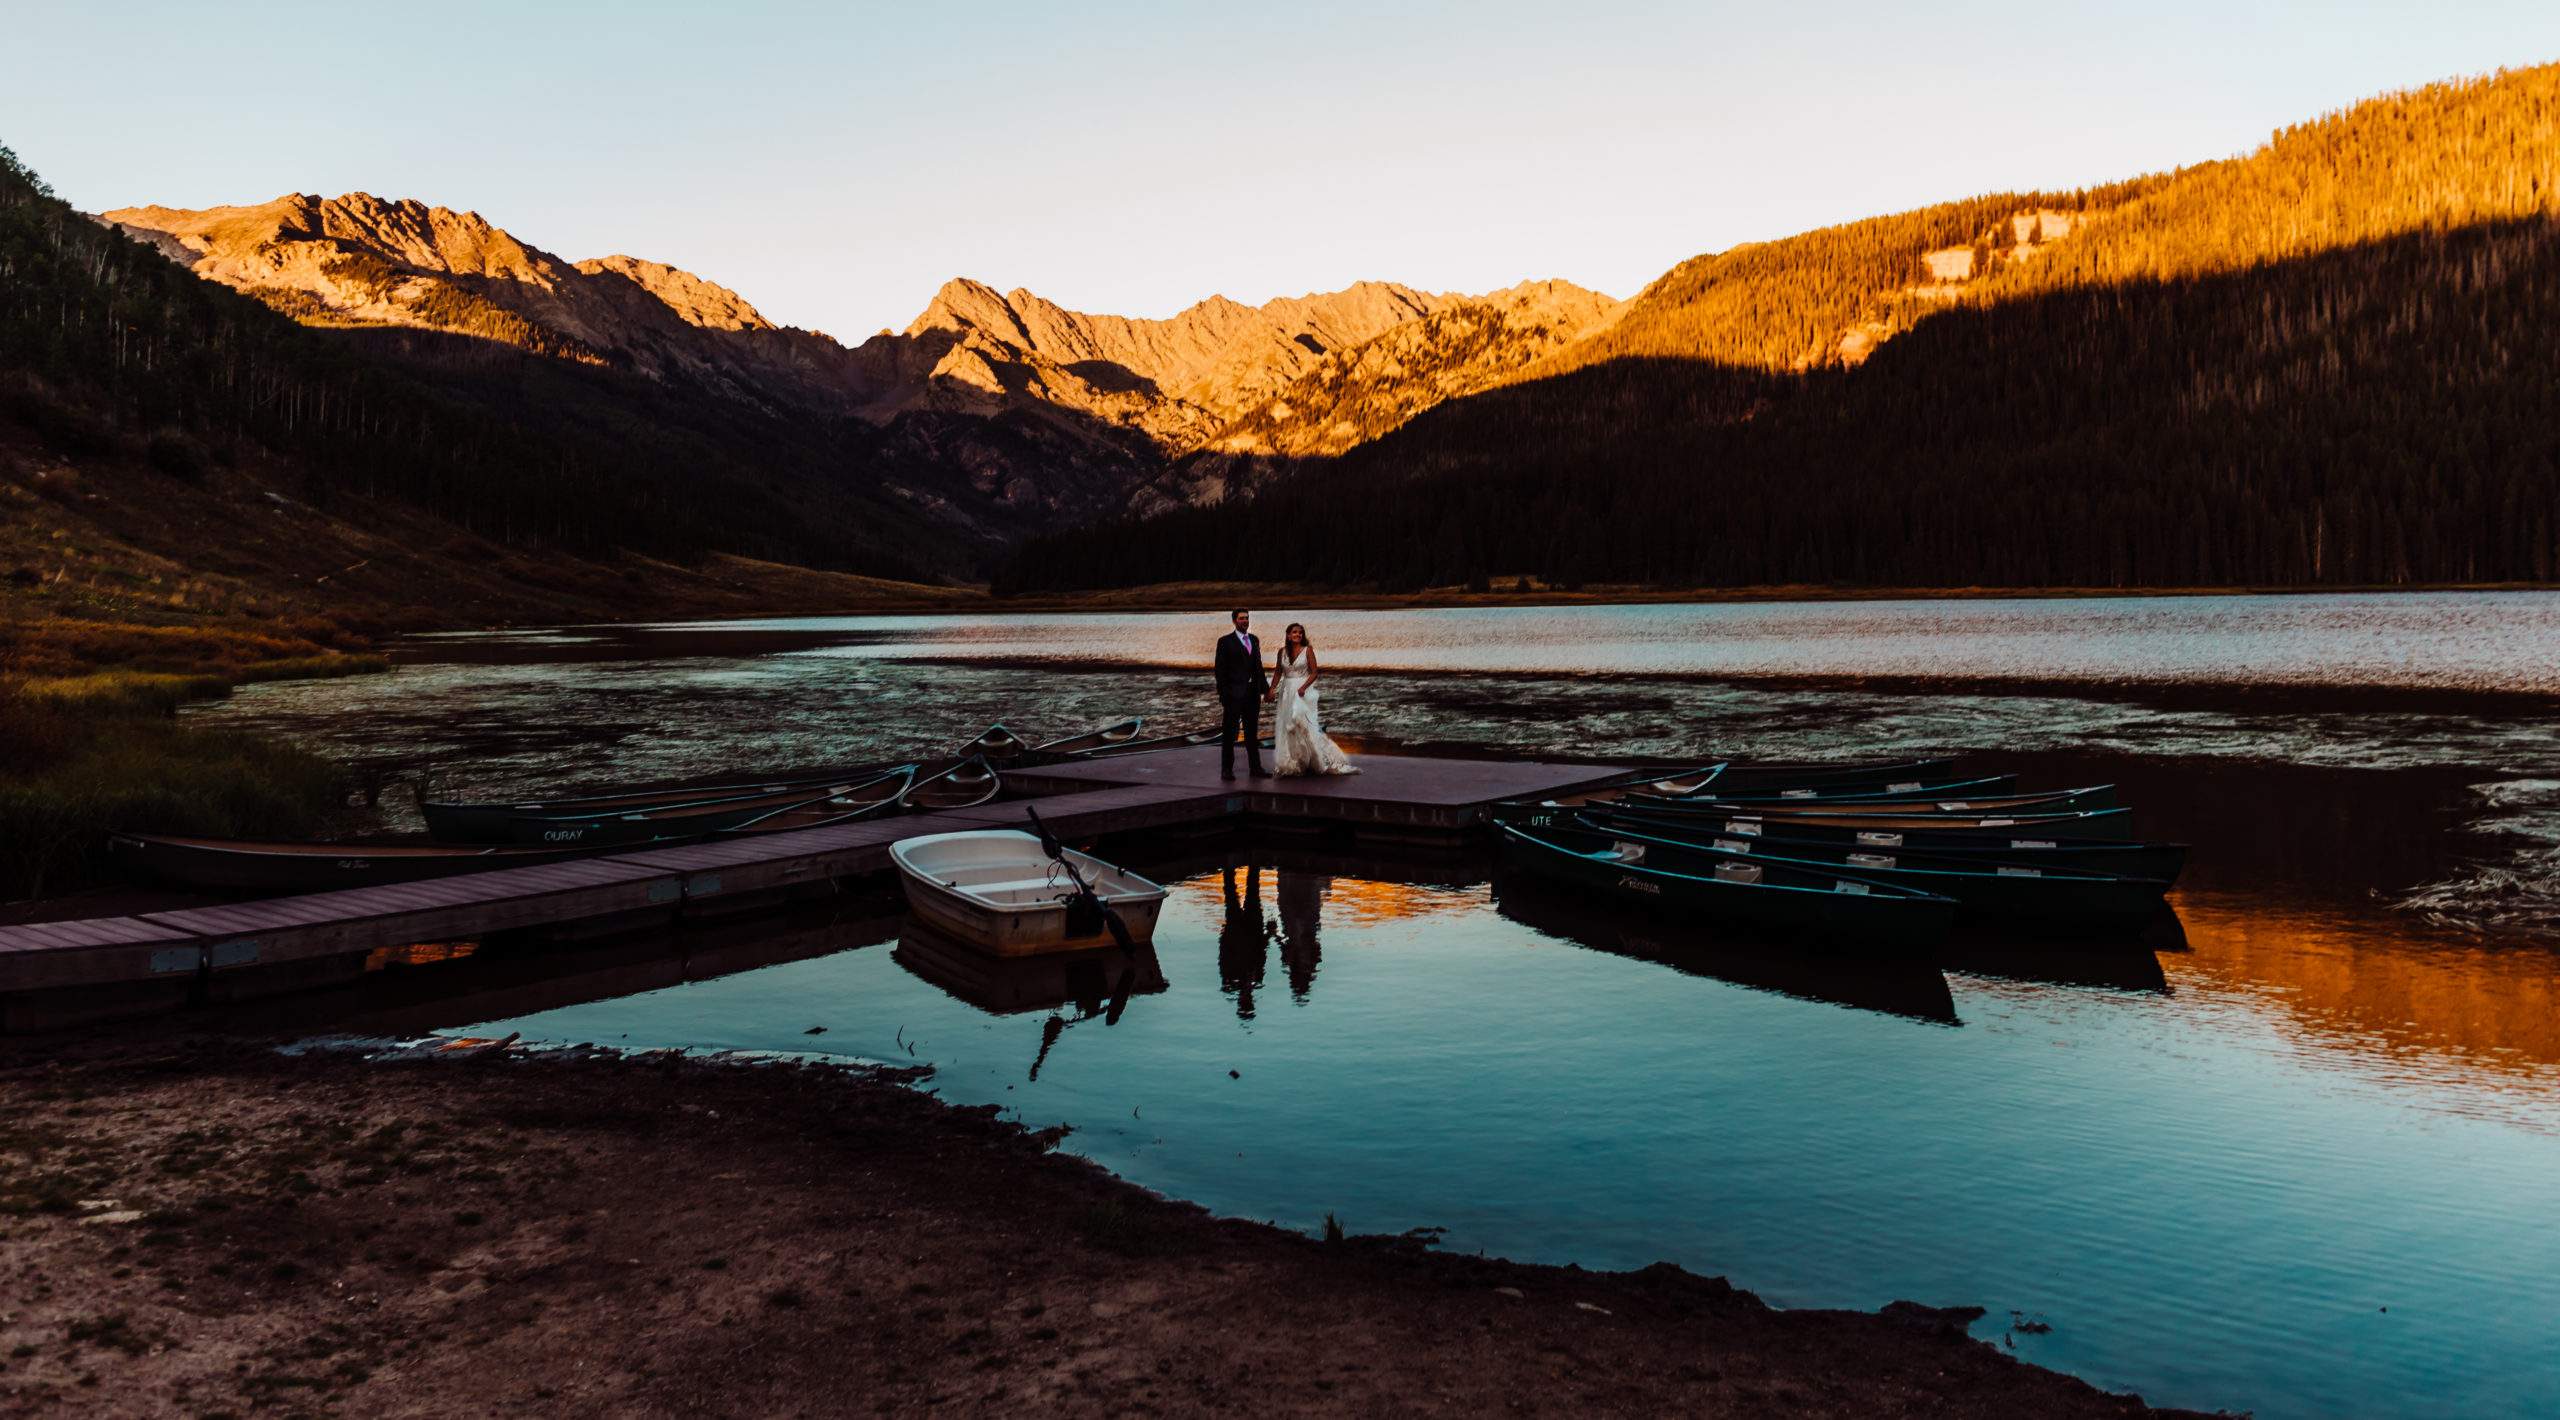 Colorado Wedding Photographer | The photograph is of a couple at their summer wedding at Piney River Ranch outside of Vail, Colorado. The couple is standing on a dock at sunset looking at the camera smiling. The background has beautiful mountain scape with alpenglow hitting the mountains perfectly.